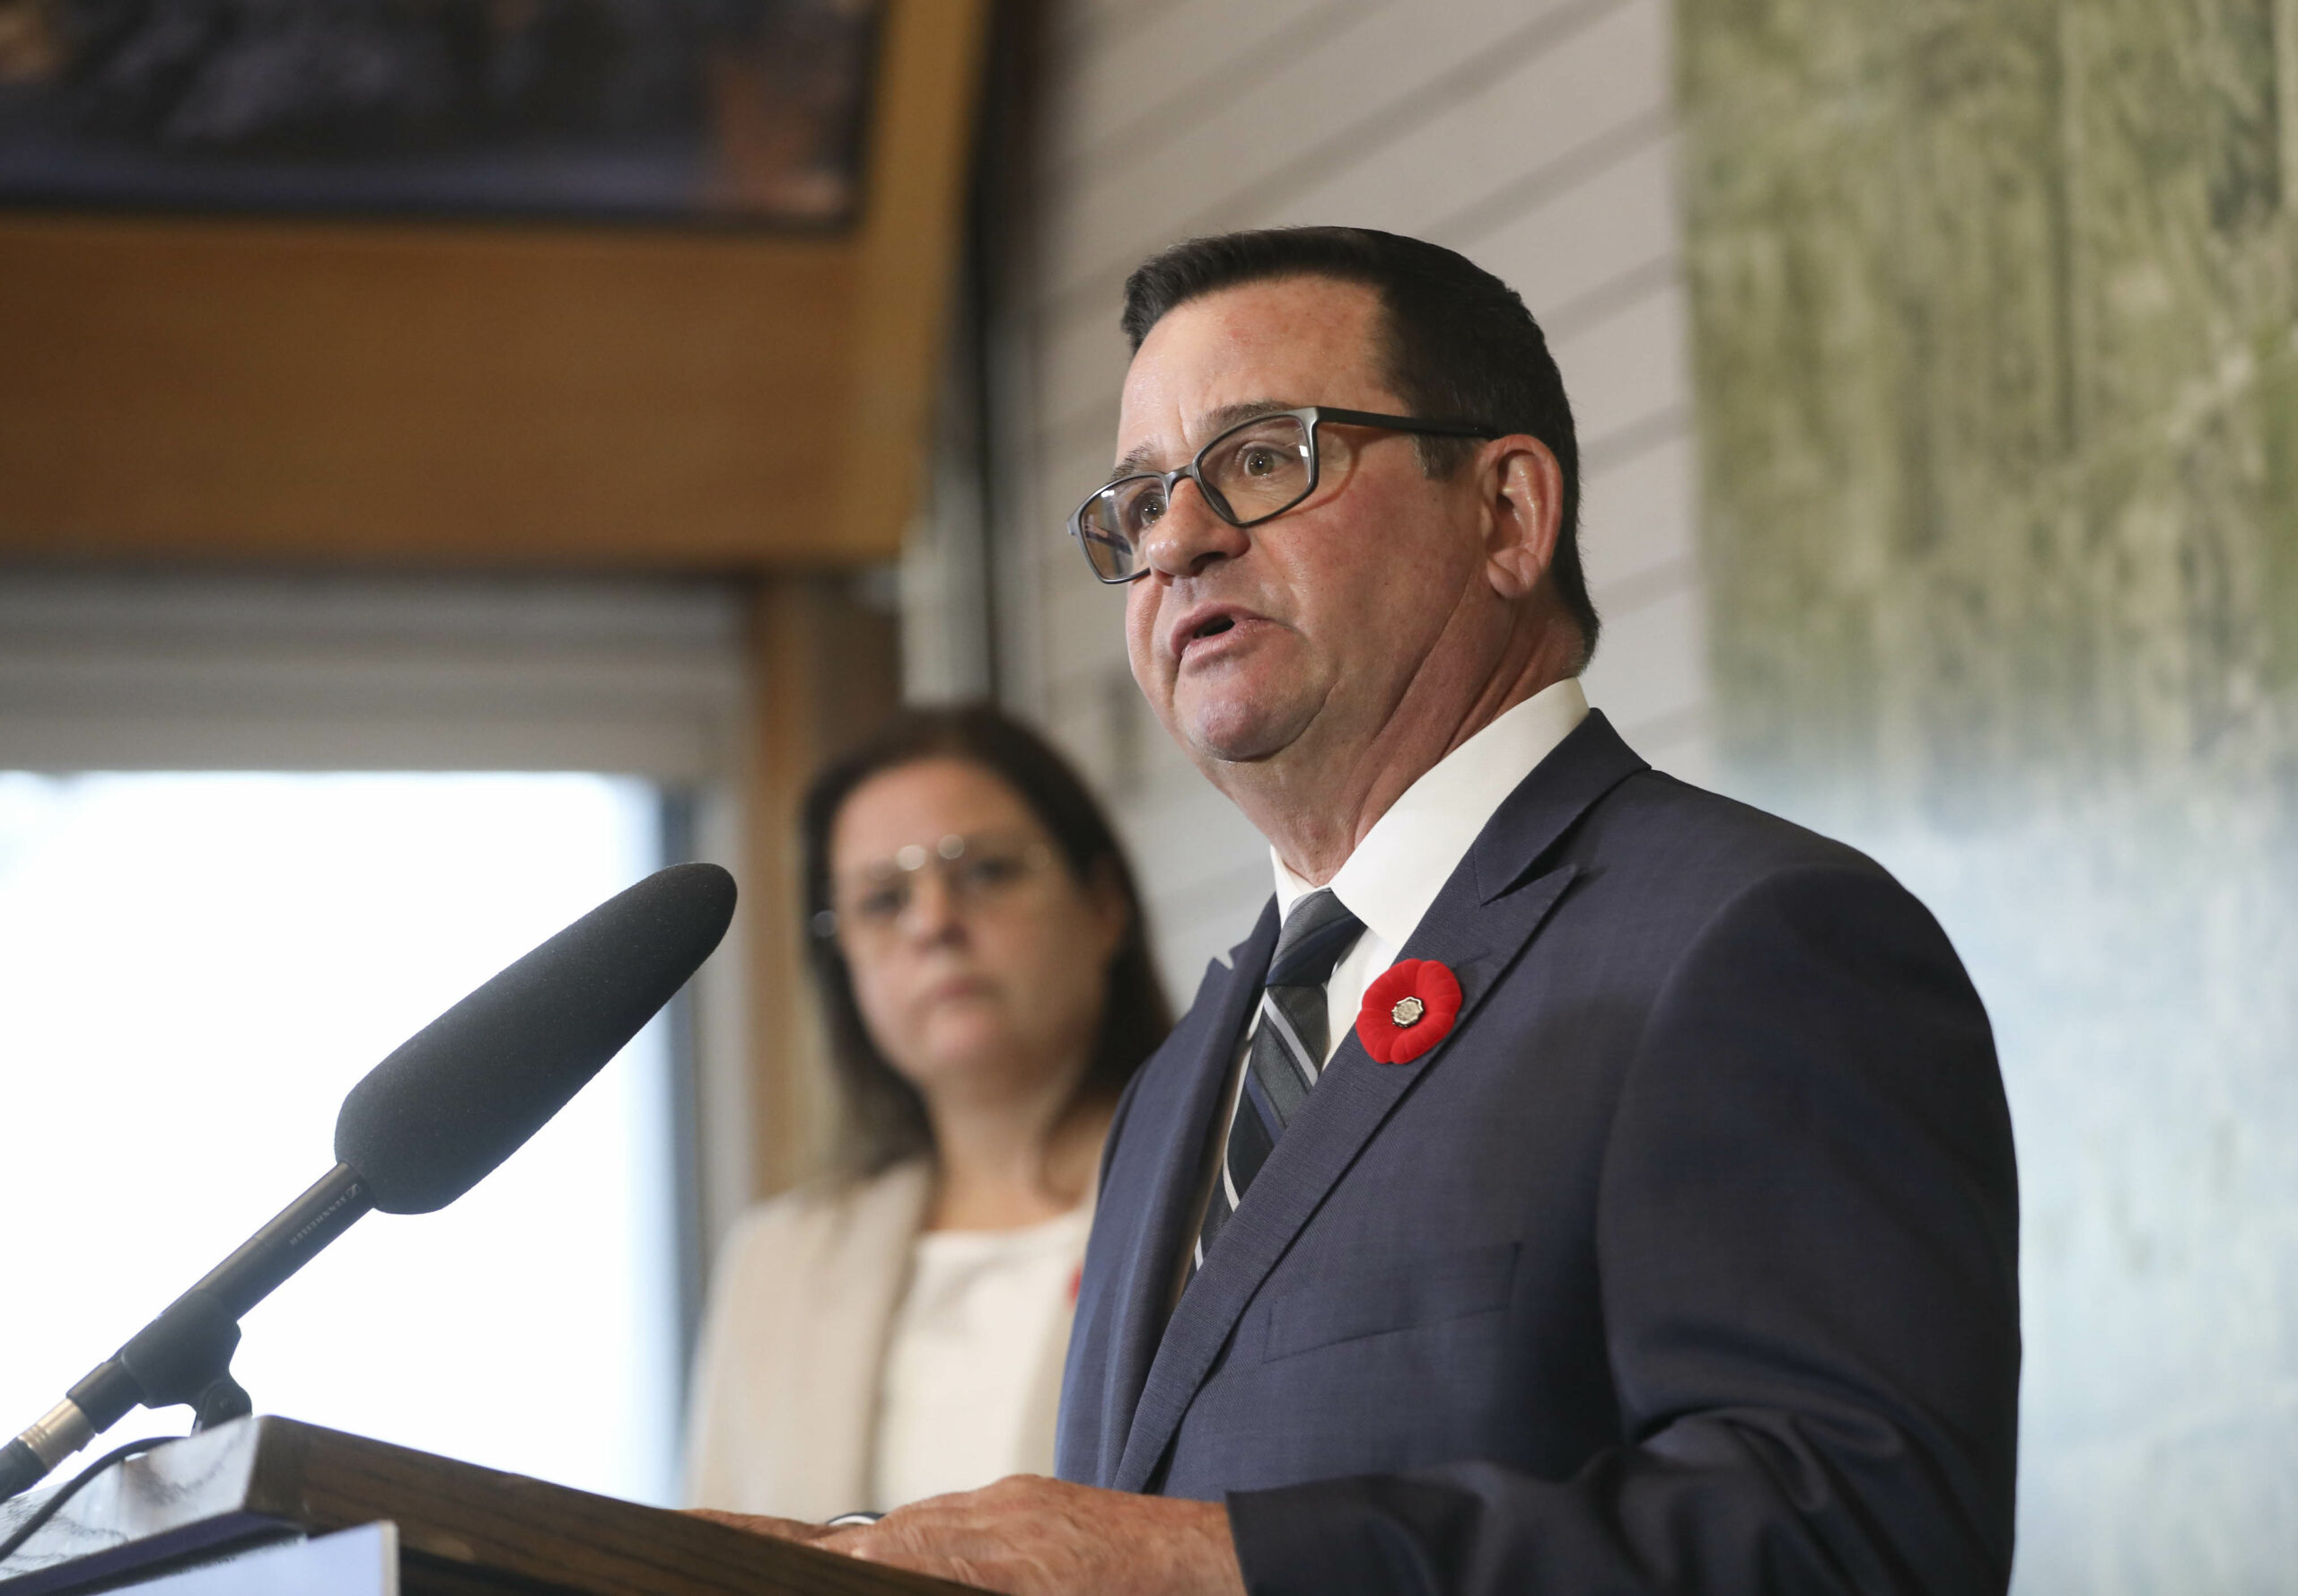 Minister Jeff Wharton wears a dark suit while making an announcement. Wharton and Premier Heather Stefanson have touted Manitoba as a mining destination.